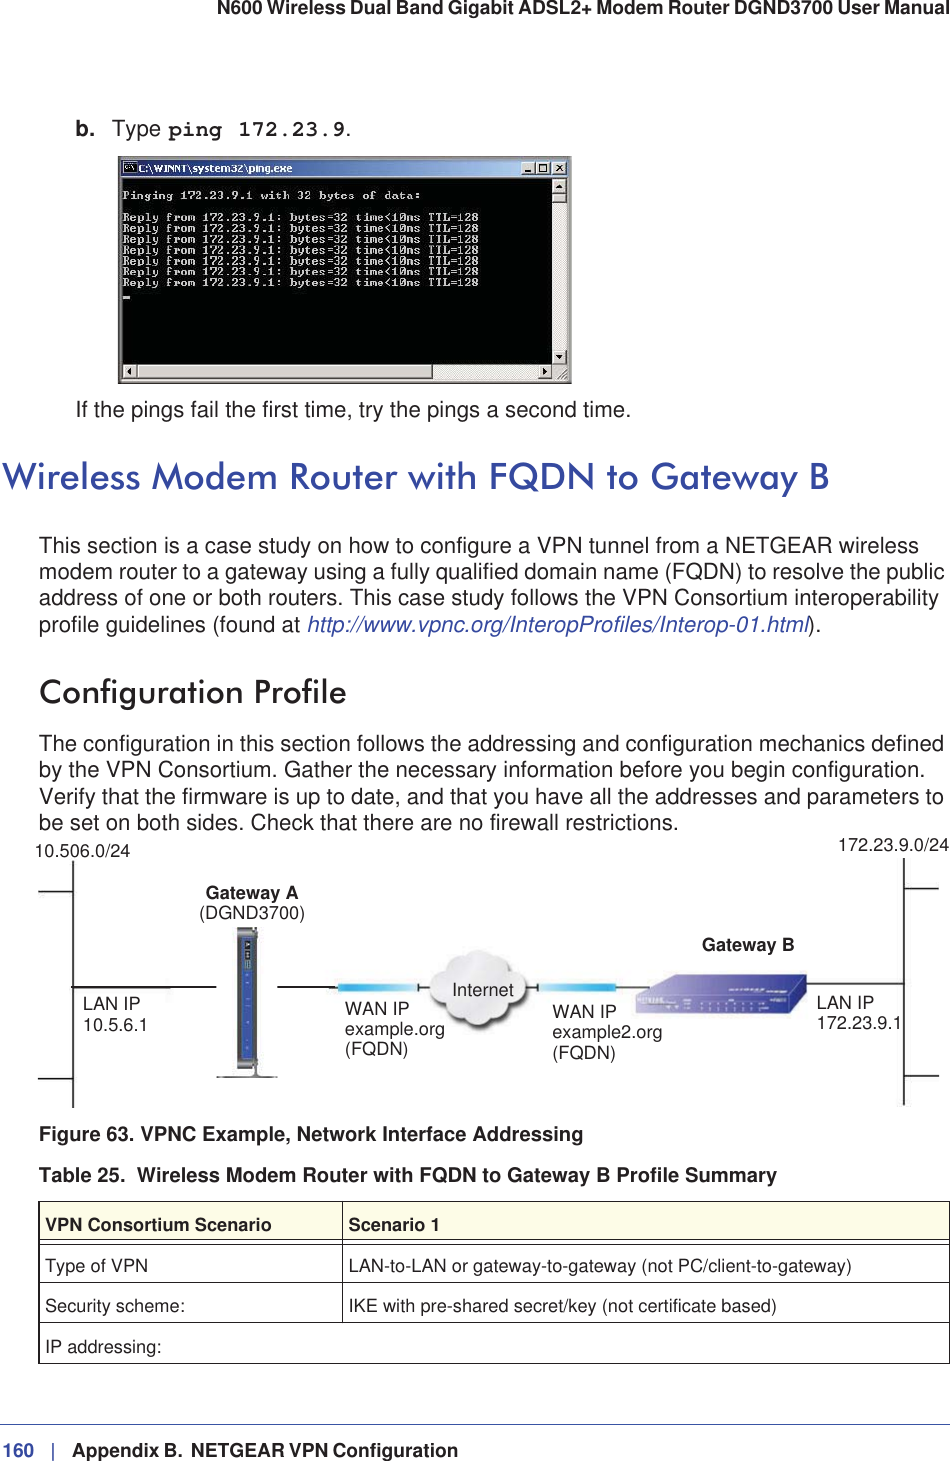 160 |   Appendix B.  NETGEAR VPN Configuration N600 Wireless Dual Band Gigabit ADSL2+ Modem Router DGND3700 User Manual b. Type ping 172.23.9.If the pings fail the first time, try the pings a second time.Wireless Modem Router with FQDN to Gateway BThis section is a case study on how to configure a VPN tunnel from a NETGEAR wireless modem router to a gateway using a fully qualified domain name (FQDN) to resolve the public address of one or both routers. This case study follows the VPN Consortium interoperability profile guidelines (found at http://www.vpnc.org/InteropProfiles/Interop-01.html).Configuration ProfileThe configuration in this section follows the addressing and configuration mechanics defined by the VPN Consortium. Gather the necessary information before you begin configuration. Verify that the firmware is up to date, and that you have all the addresses and parameters to be set on both sides. Check that there are no firewall restrictions.Gateway AWAN IP Internet10.506.0/24(DGND3700)LAN IP10.5.6.1 example.org WAN IPexample2.orgGateway BLAN IP172.23.9.1172.23.9.0/24(FQDN) (FQDN)Figure 63. VPNC Example, Network Interface AddressingTable 25.  Wireless Modem Router with FQDN to Gateway B Profile SummaryVPN Consortium Scenario Scenario 1Type of VPN  LAN-to-LAN or gateway-to-gateway (not PC/client-to-gateway)Security scheme: IKE with pre-shared secret/key (not certificate based)IP addressing: